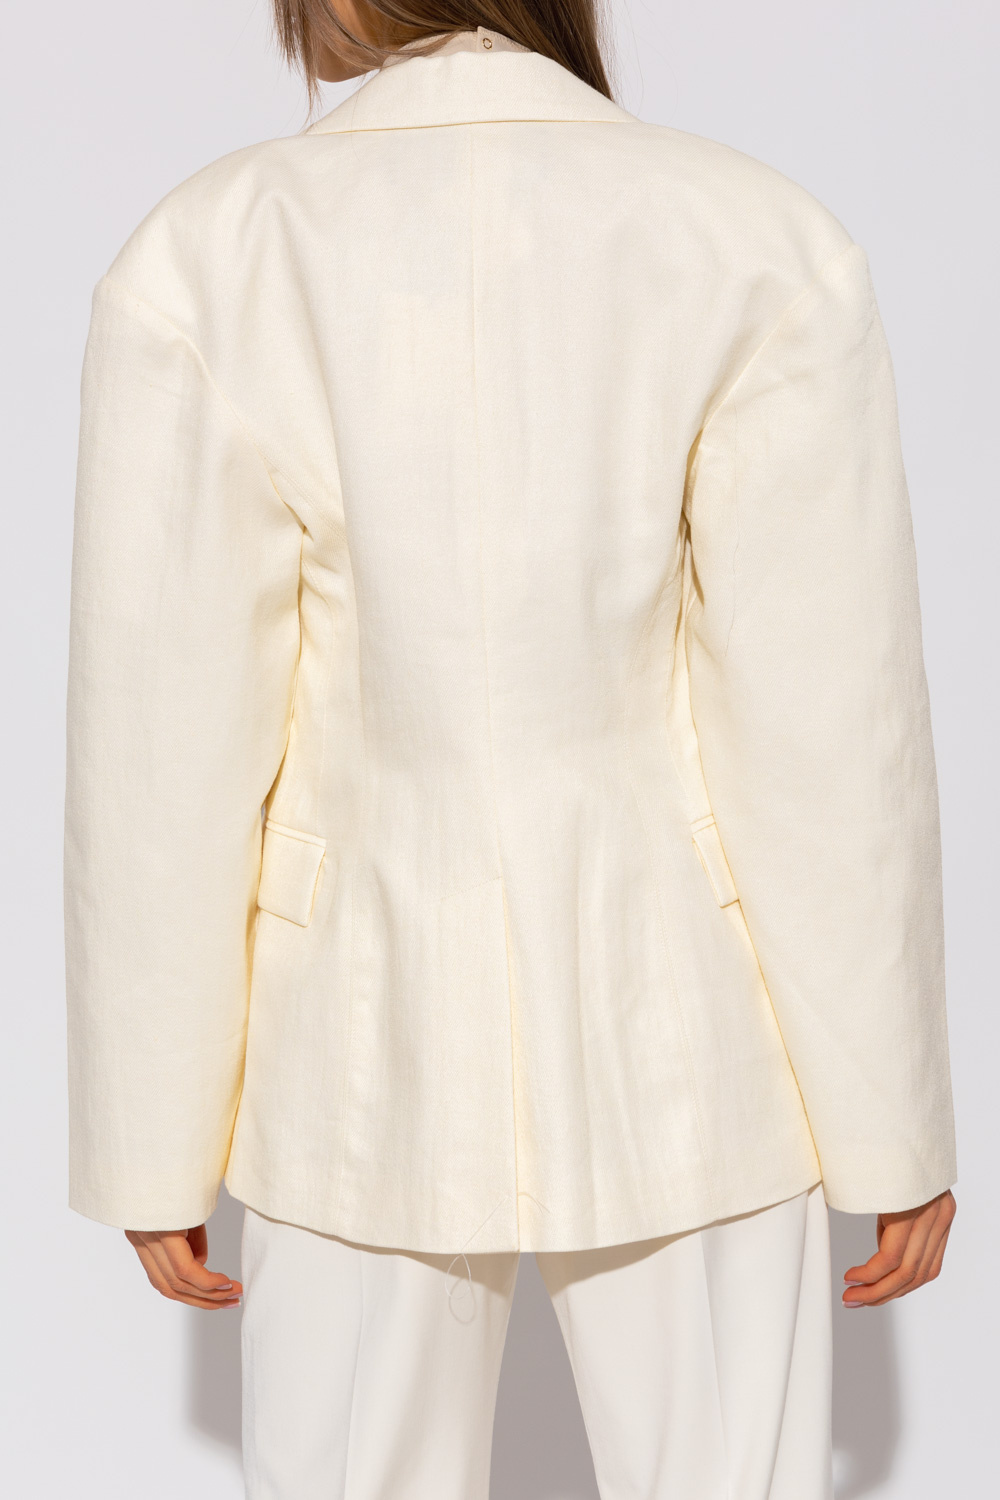 Jacquemus Tailored single-breasted blazer